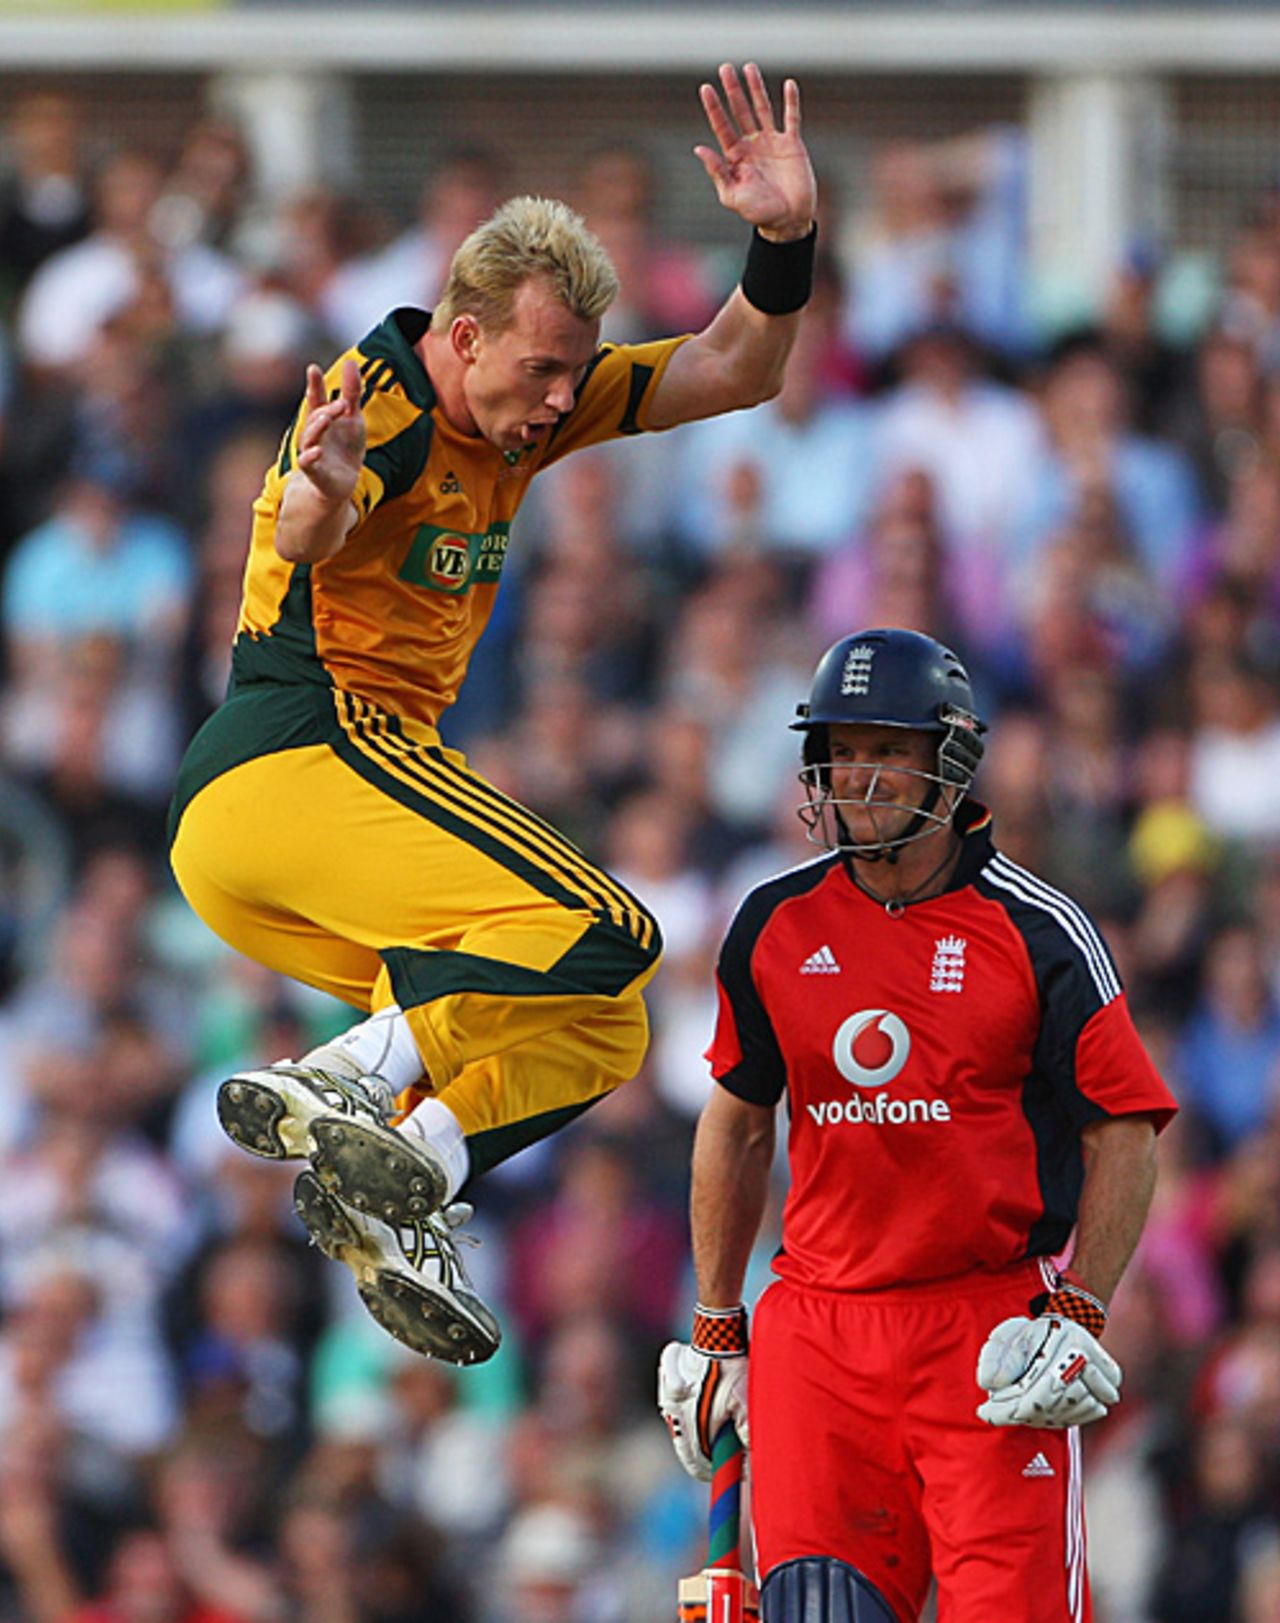 A leaping Brett Lee celebrates the early wicket of Andrew Strauss, England v Australia, 1st ODI, The Oval, September 4, 2009